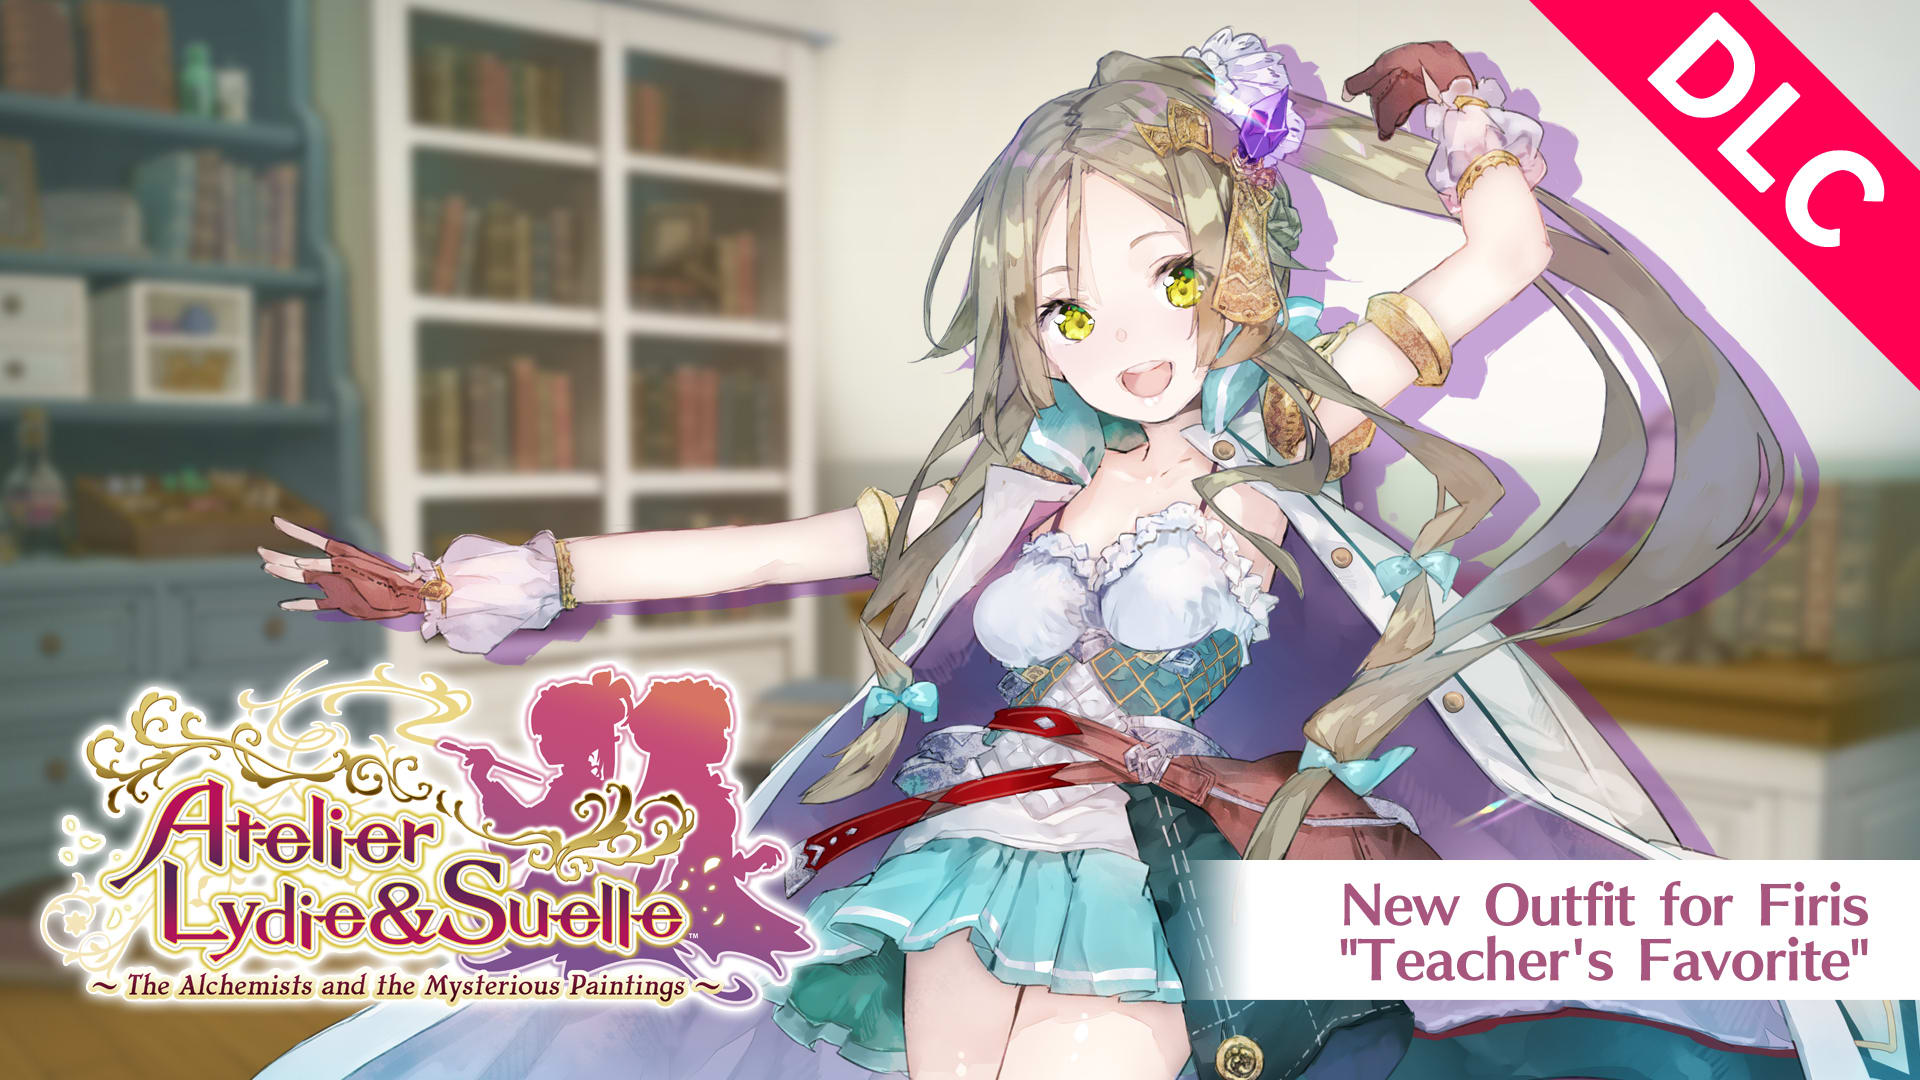 Atelier Lydie & Suelle: New Outfit for Firis "Teacher's Favorite"